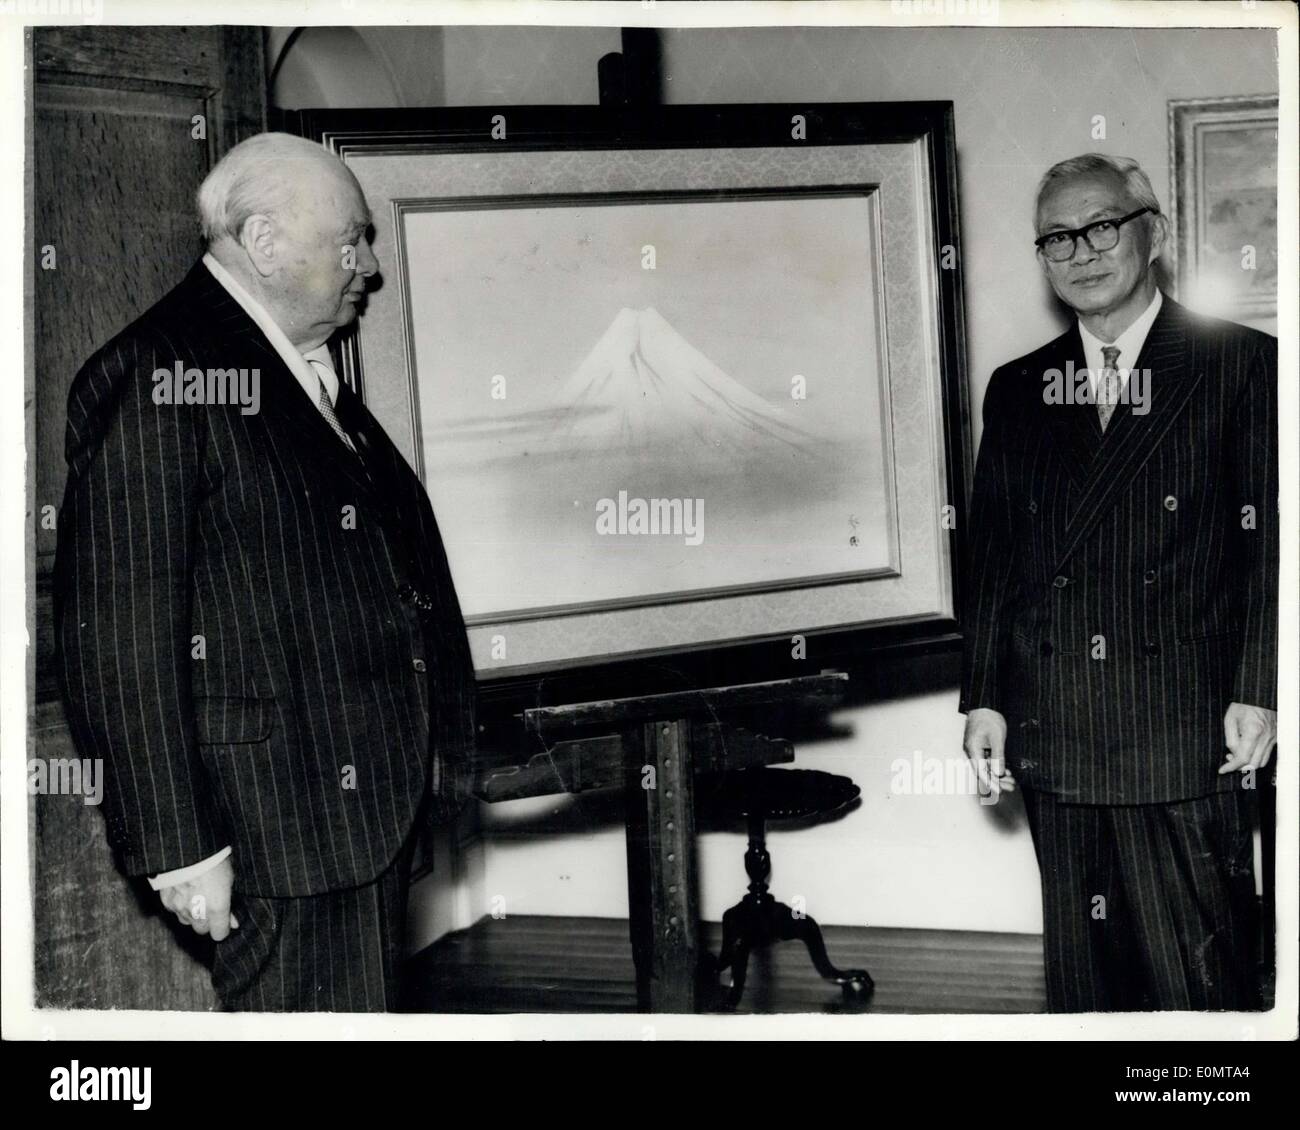 Aug. 11, 1956 - Sir Winston Churchill Receives a Japanese painting from Ambassador. Sir Winston Churchill admires a Japanese painting of Mount Fuji-Yama after it had been presented to him by Mr. Haruhiko Nishi (right) at his home at Chartwell, westerham, Kent yesterday. Mr. Nishi is the Japanese Ambassador to London Stock Photo